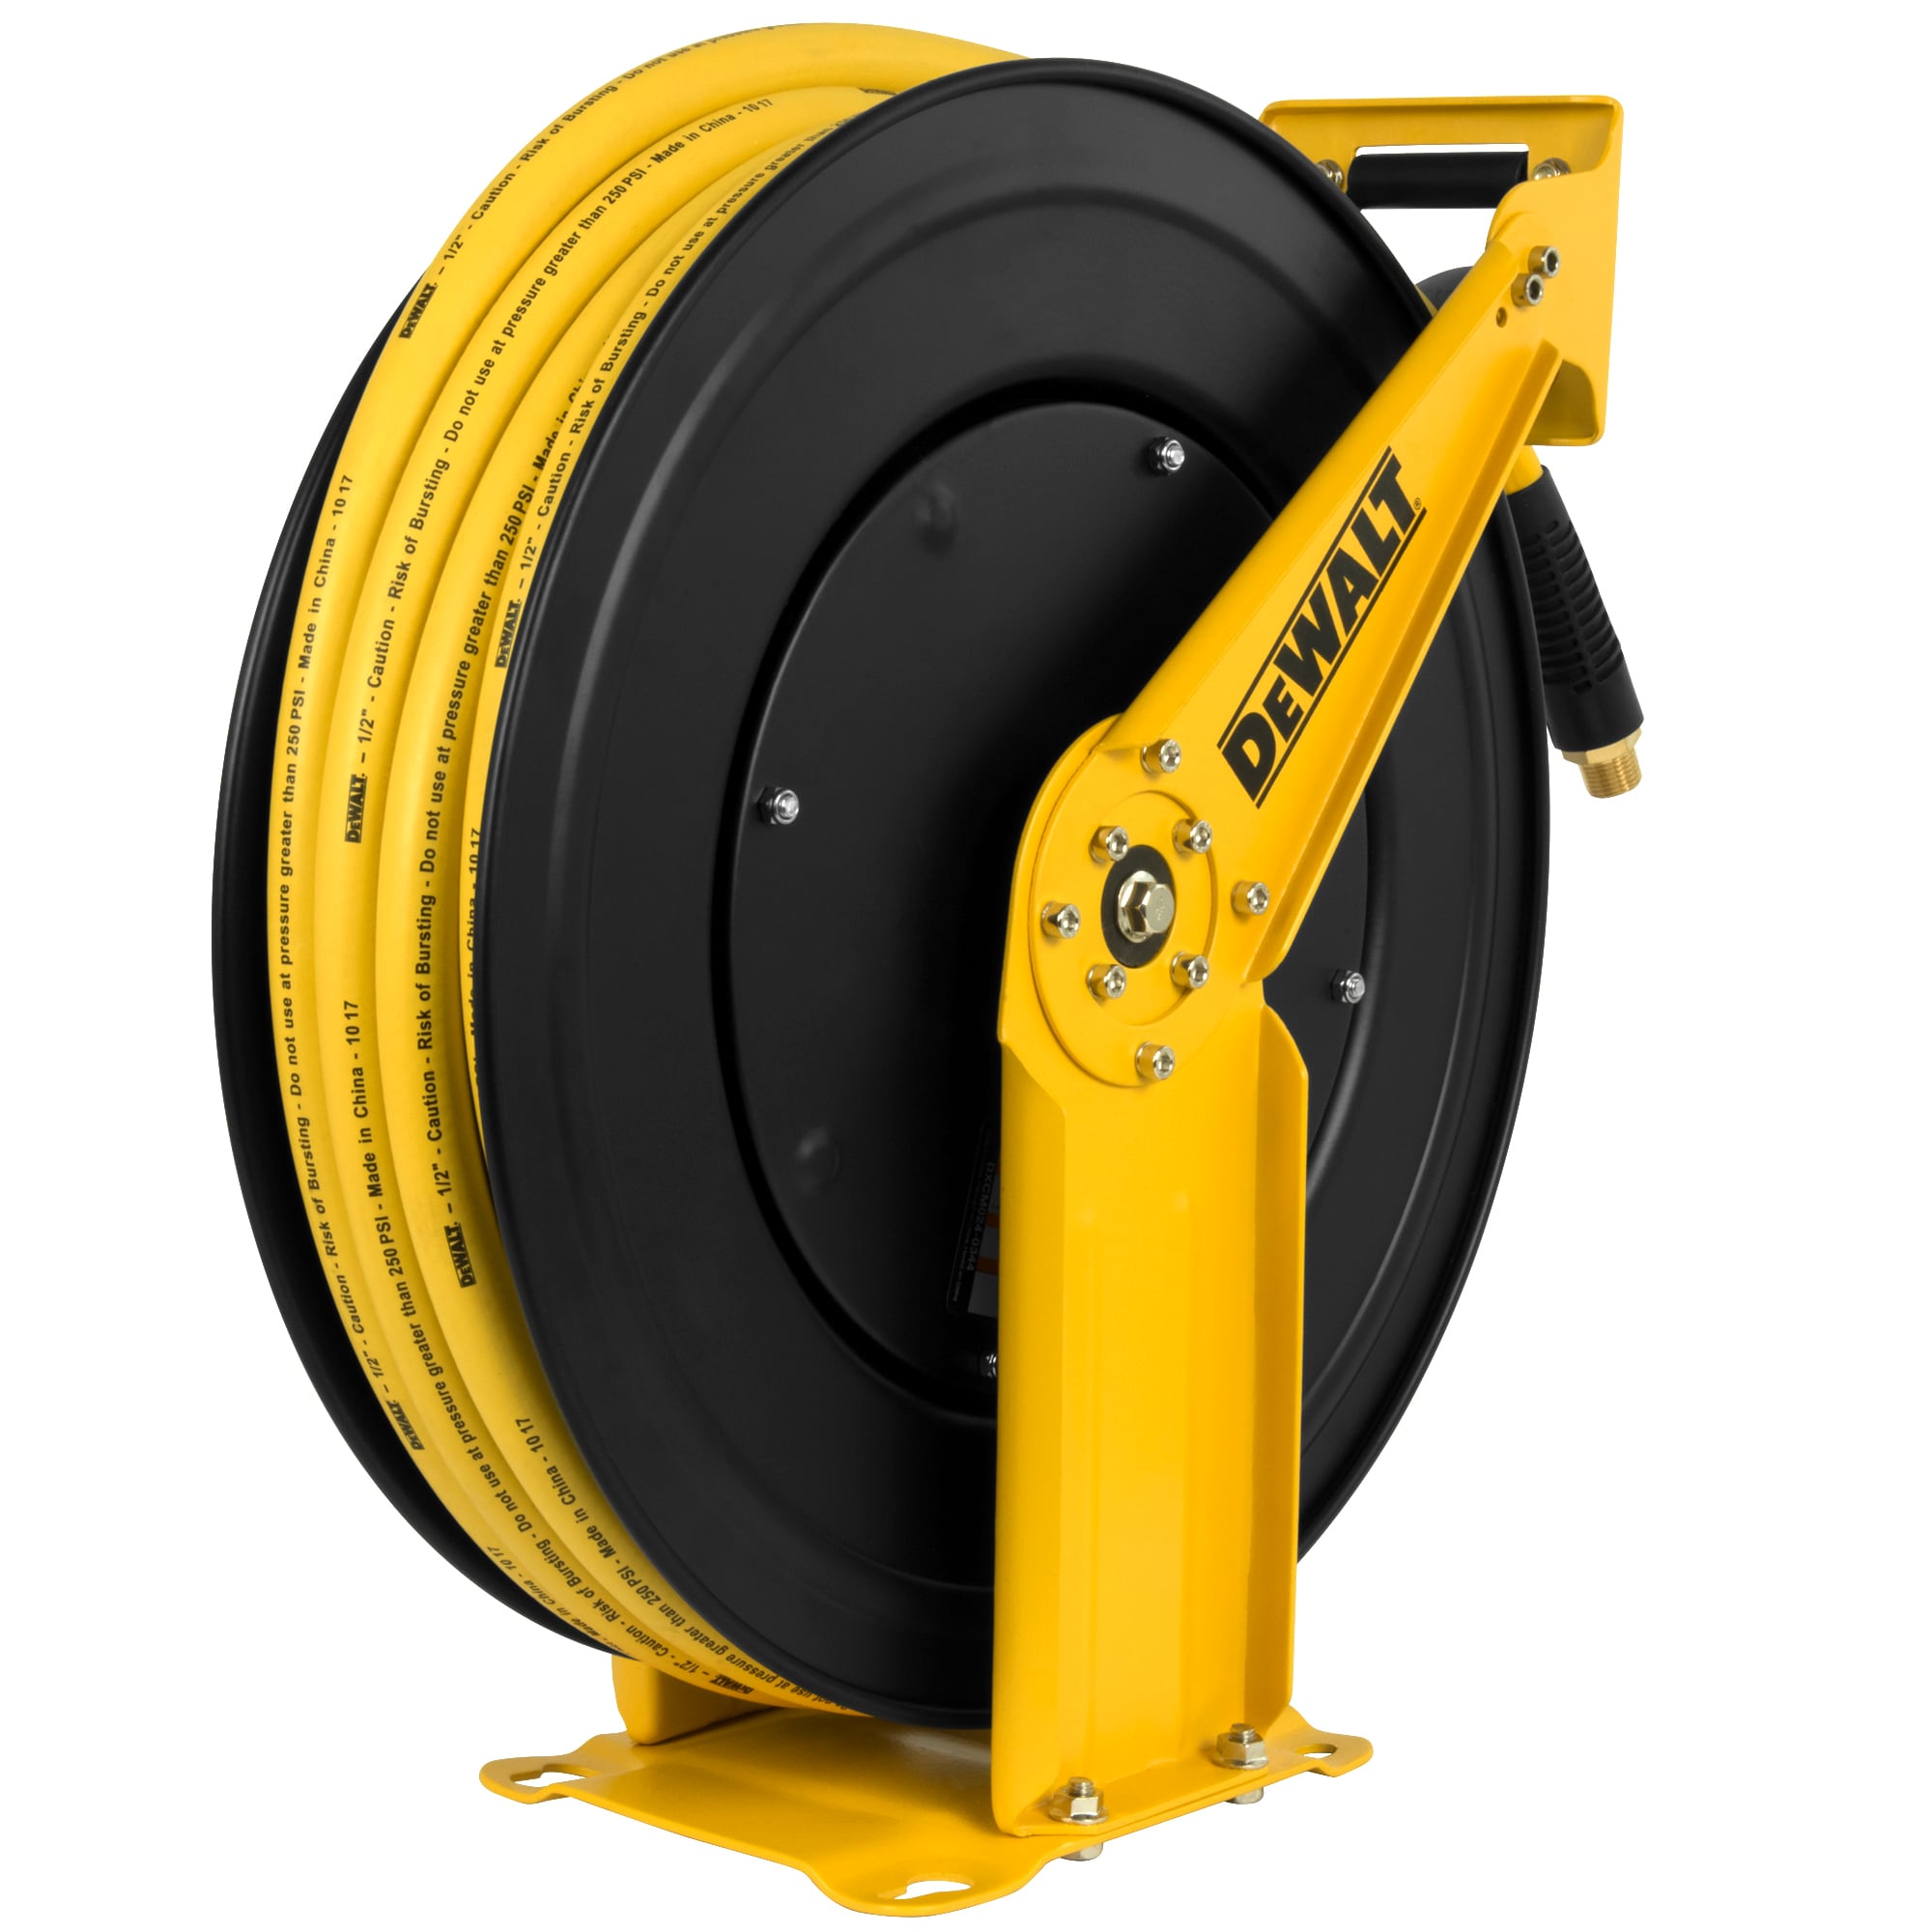 SP Tools - RETRACTABLE AIR HOSE REEL - WALL MOUNTED ONLY .. $99 🤯 Equipped  with a large 15m Premium Grade Air Hose, this mounted reel provides you  with the freedom to